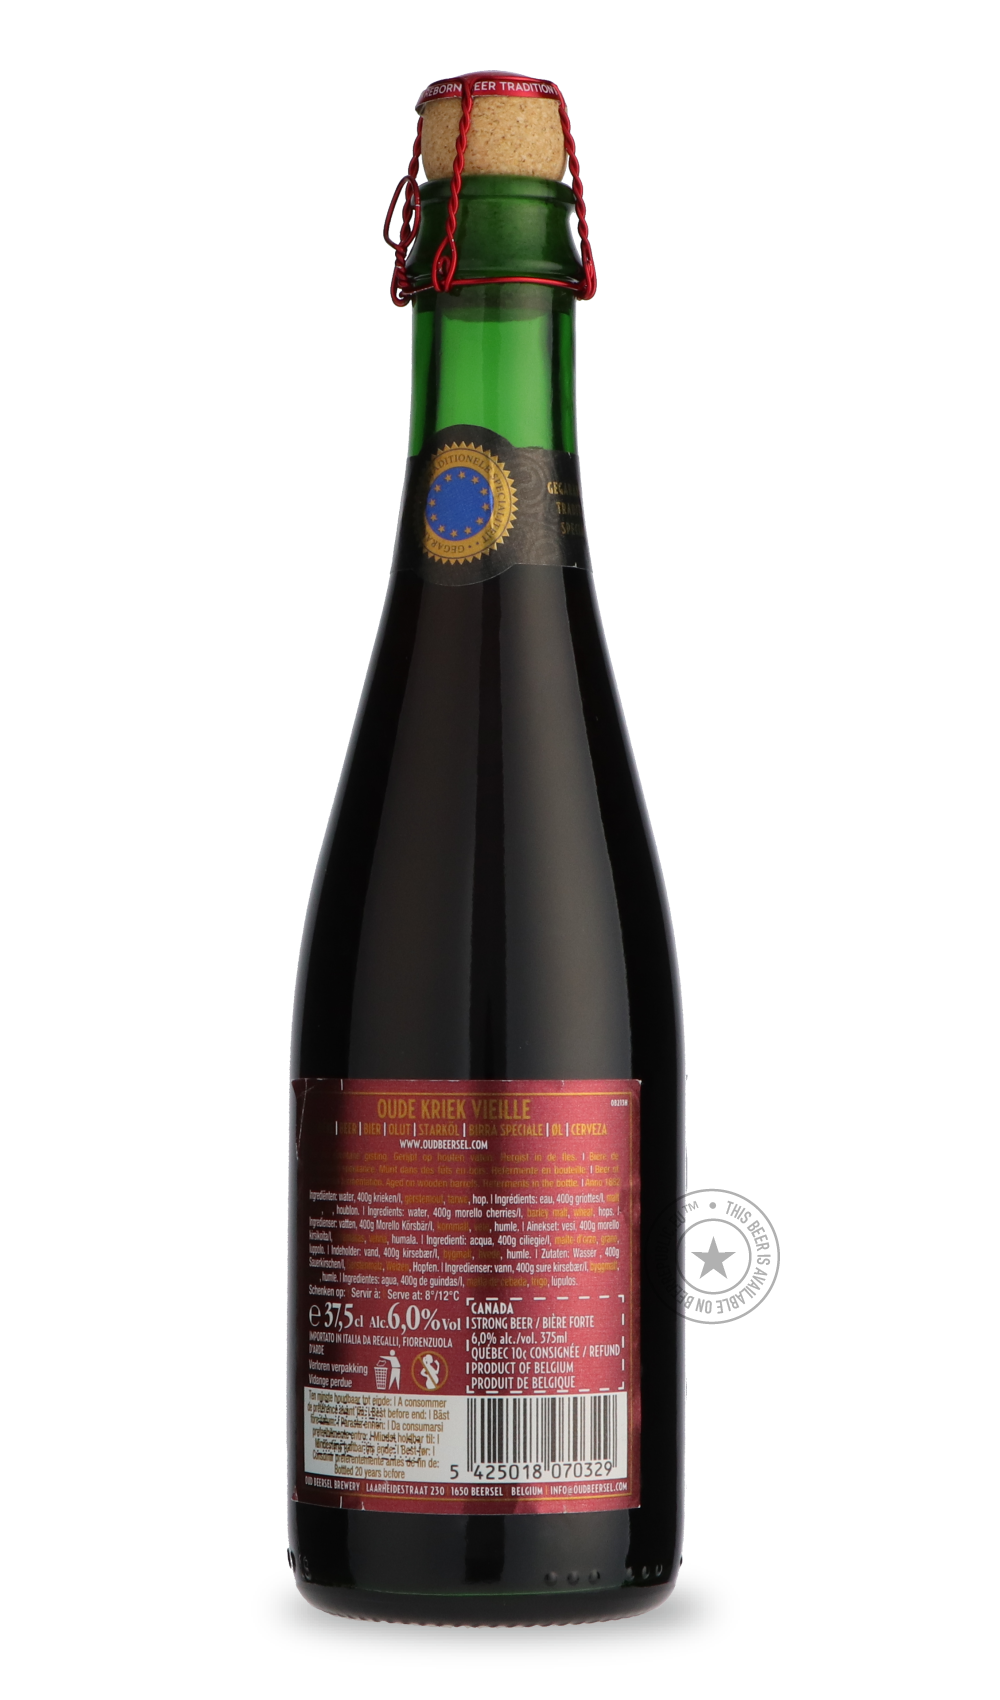 -Oud Beersel- Oude Kriek (Vieille)-Sour / Wild & Fruity- Only @ Beer Republic - The best online beer store for American & Canadian craft beer - Buy beer online from the USA and Canada - Bier online kopen - Amerikaans bier kopen - Craft beer store - Craft beer kopen - Amerikanisch bier kaufen - Bier online kaufen - Acheter biere online - IPA - Stout - Porter - New England IPA - Hazy IPA - Imperial Stout - Barrel Aged - Barrel Aged Imperial Stout - Brown - Dark beer - Blond - Blonde - Pilsner - Lager - Wheat 